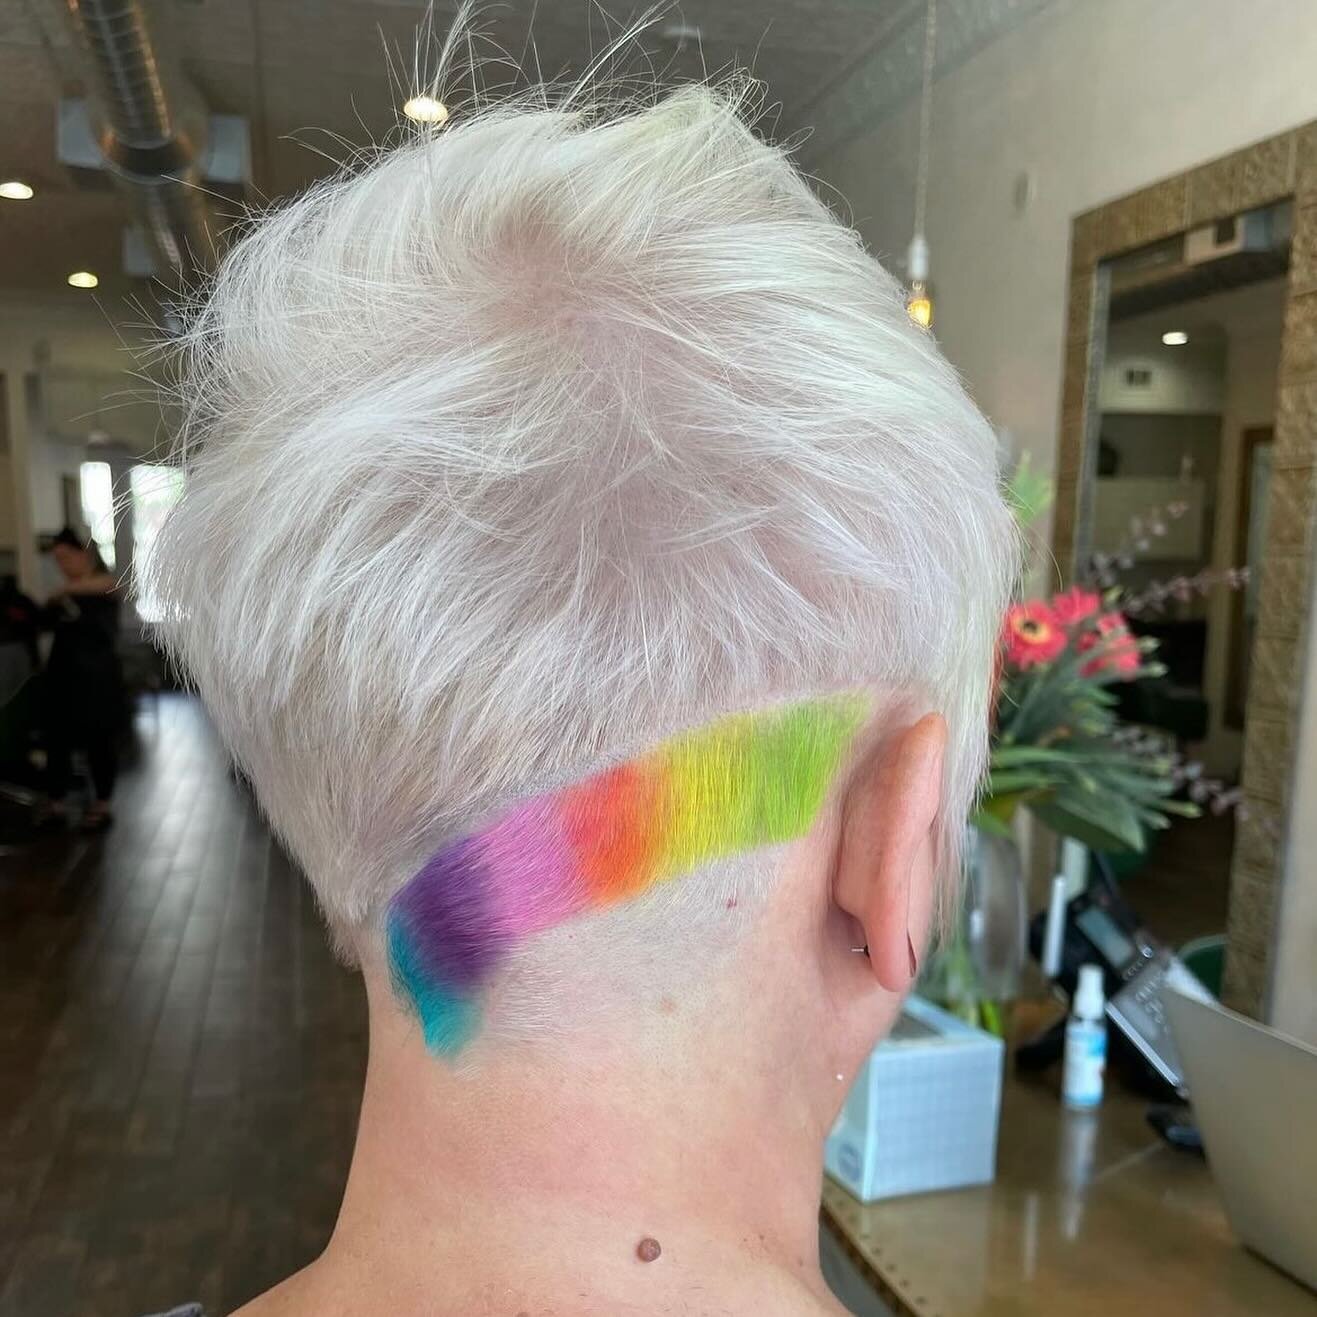 Life&rsquo;s too short for boring hair! 🌈✂️ Let&rsquo;s turn those locks into a vibrant masterpiece. Embrace the boldness of sharp cuts and rainbow hues! 

Color &amp; Cut by Jasmine ✂️ @jasminep_hairstylist 

#hairsalon #rainbowhair #modernsalon #a